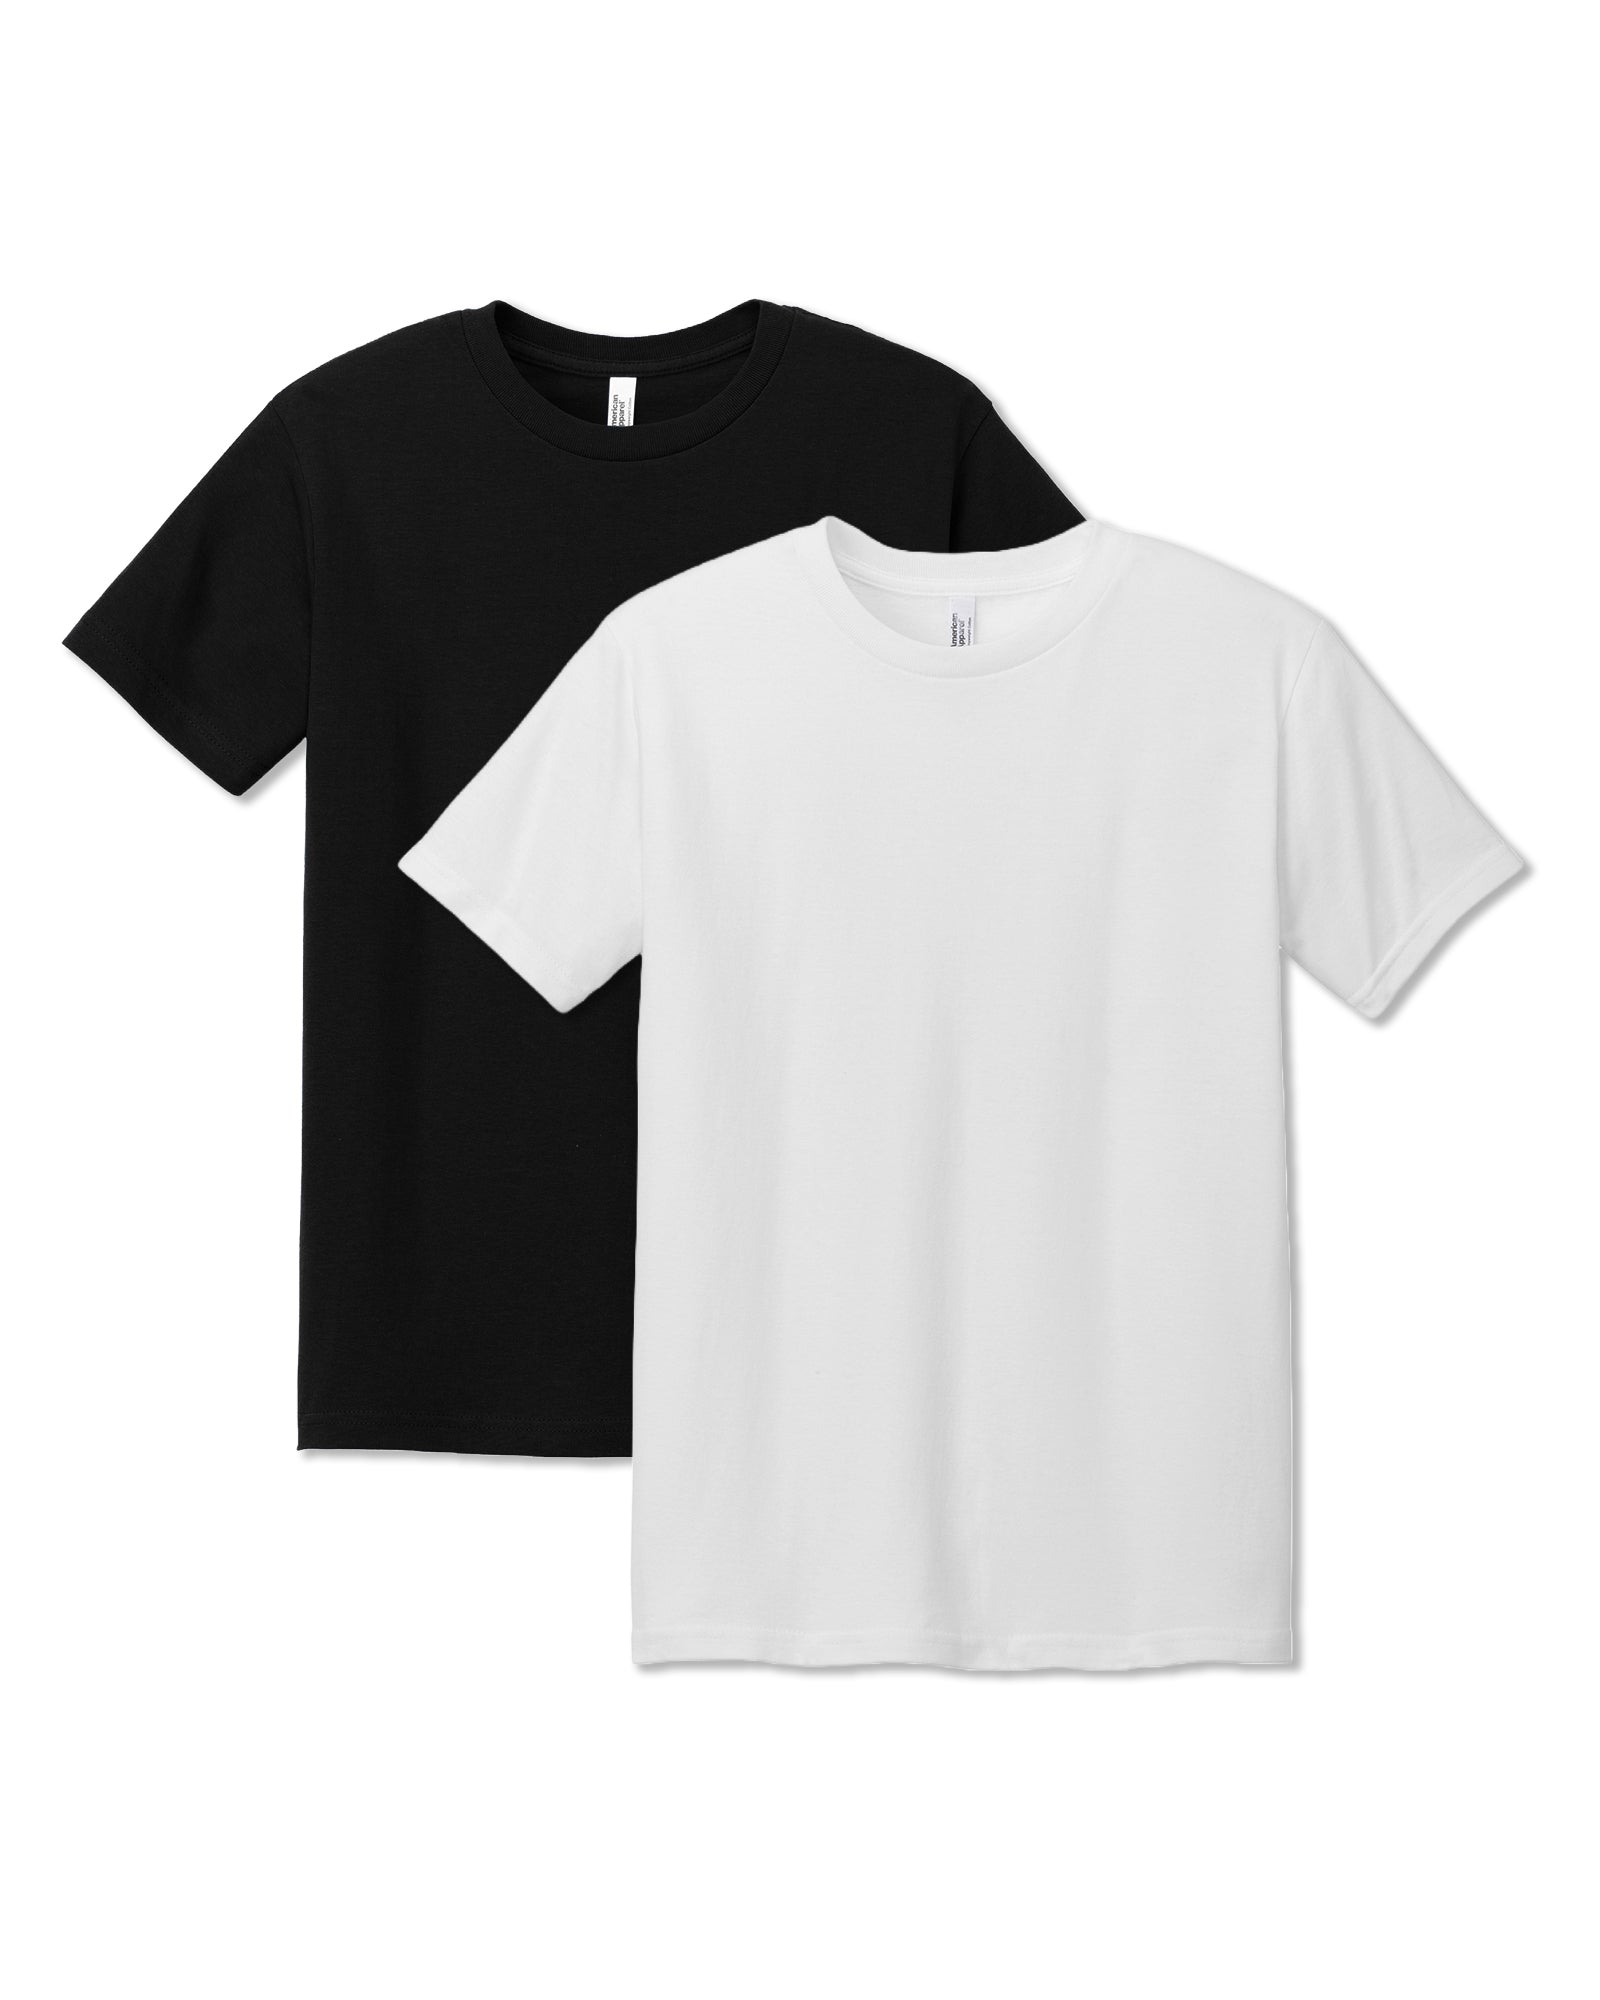 Pack of 2 Heavyweight Unisex T-Shirt - Black and White